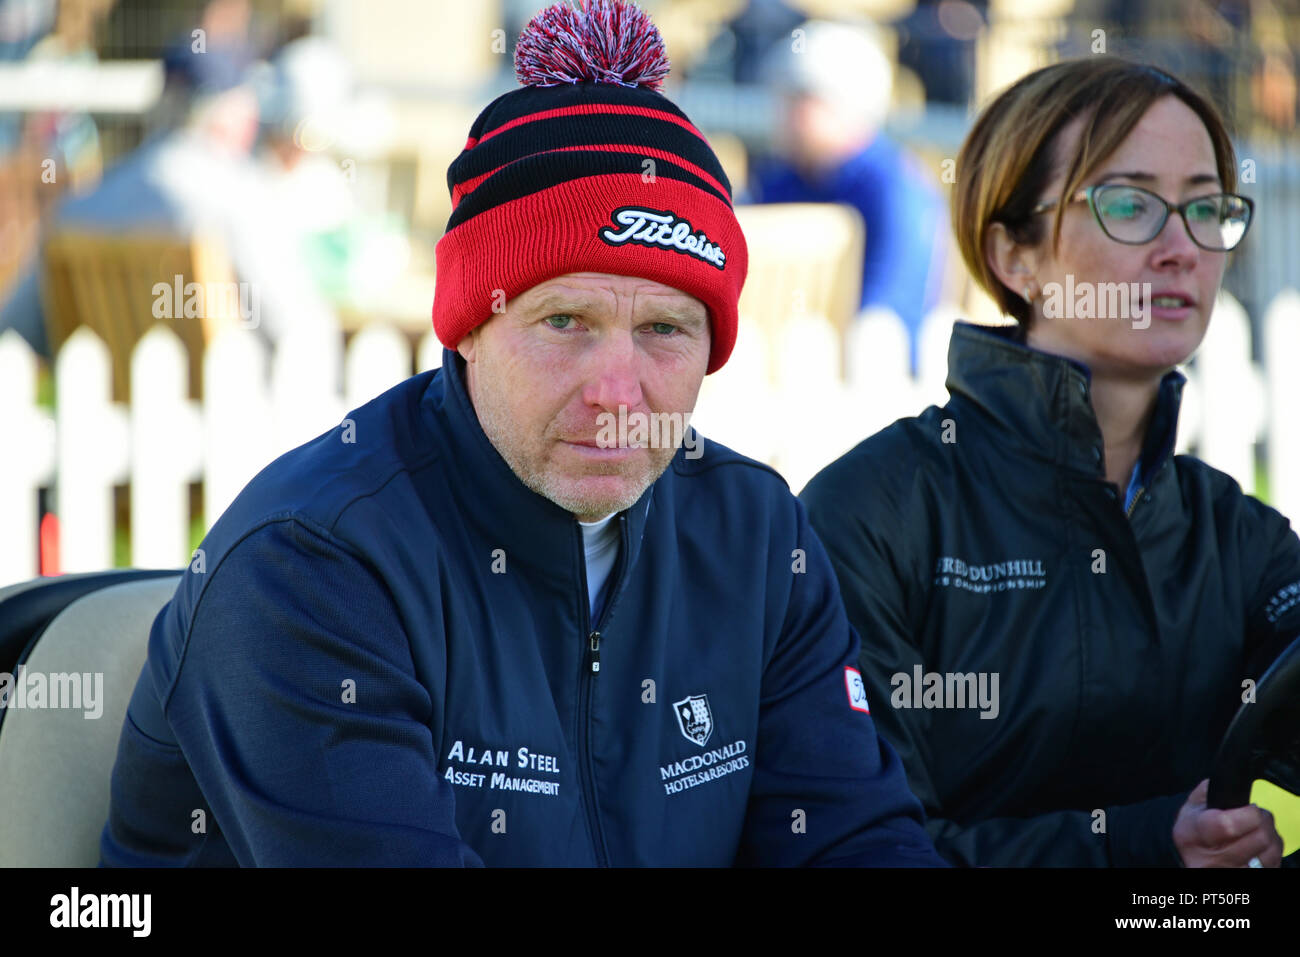 St Andrews, Scotland, United Kingdom, 06, October, 2018. Scotland's Stephen Gallacher is driven away in a buggy at the end of his round at the Old Course, St Andrews, on Day 3 of the Dunhill Links Championship, which he finished three shots off the lead. © Ken Jack / Alamy Live News Stock Photo